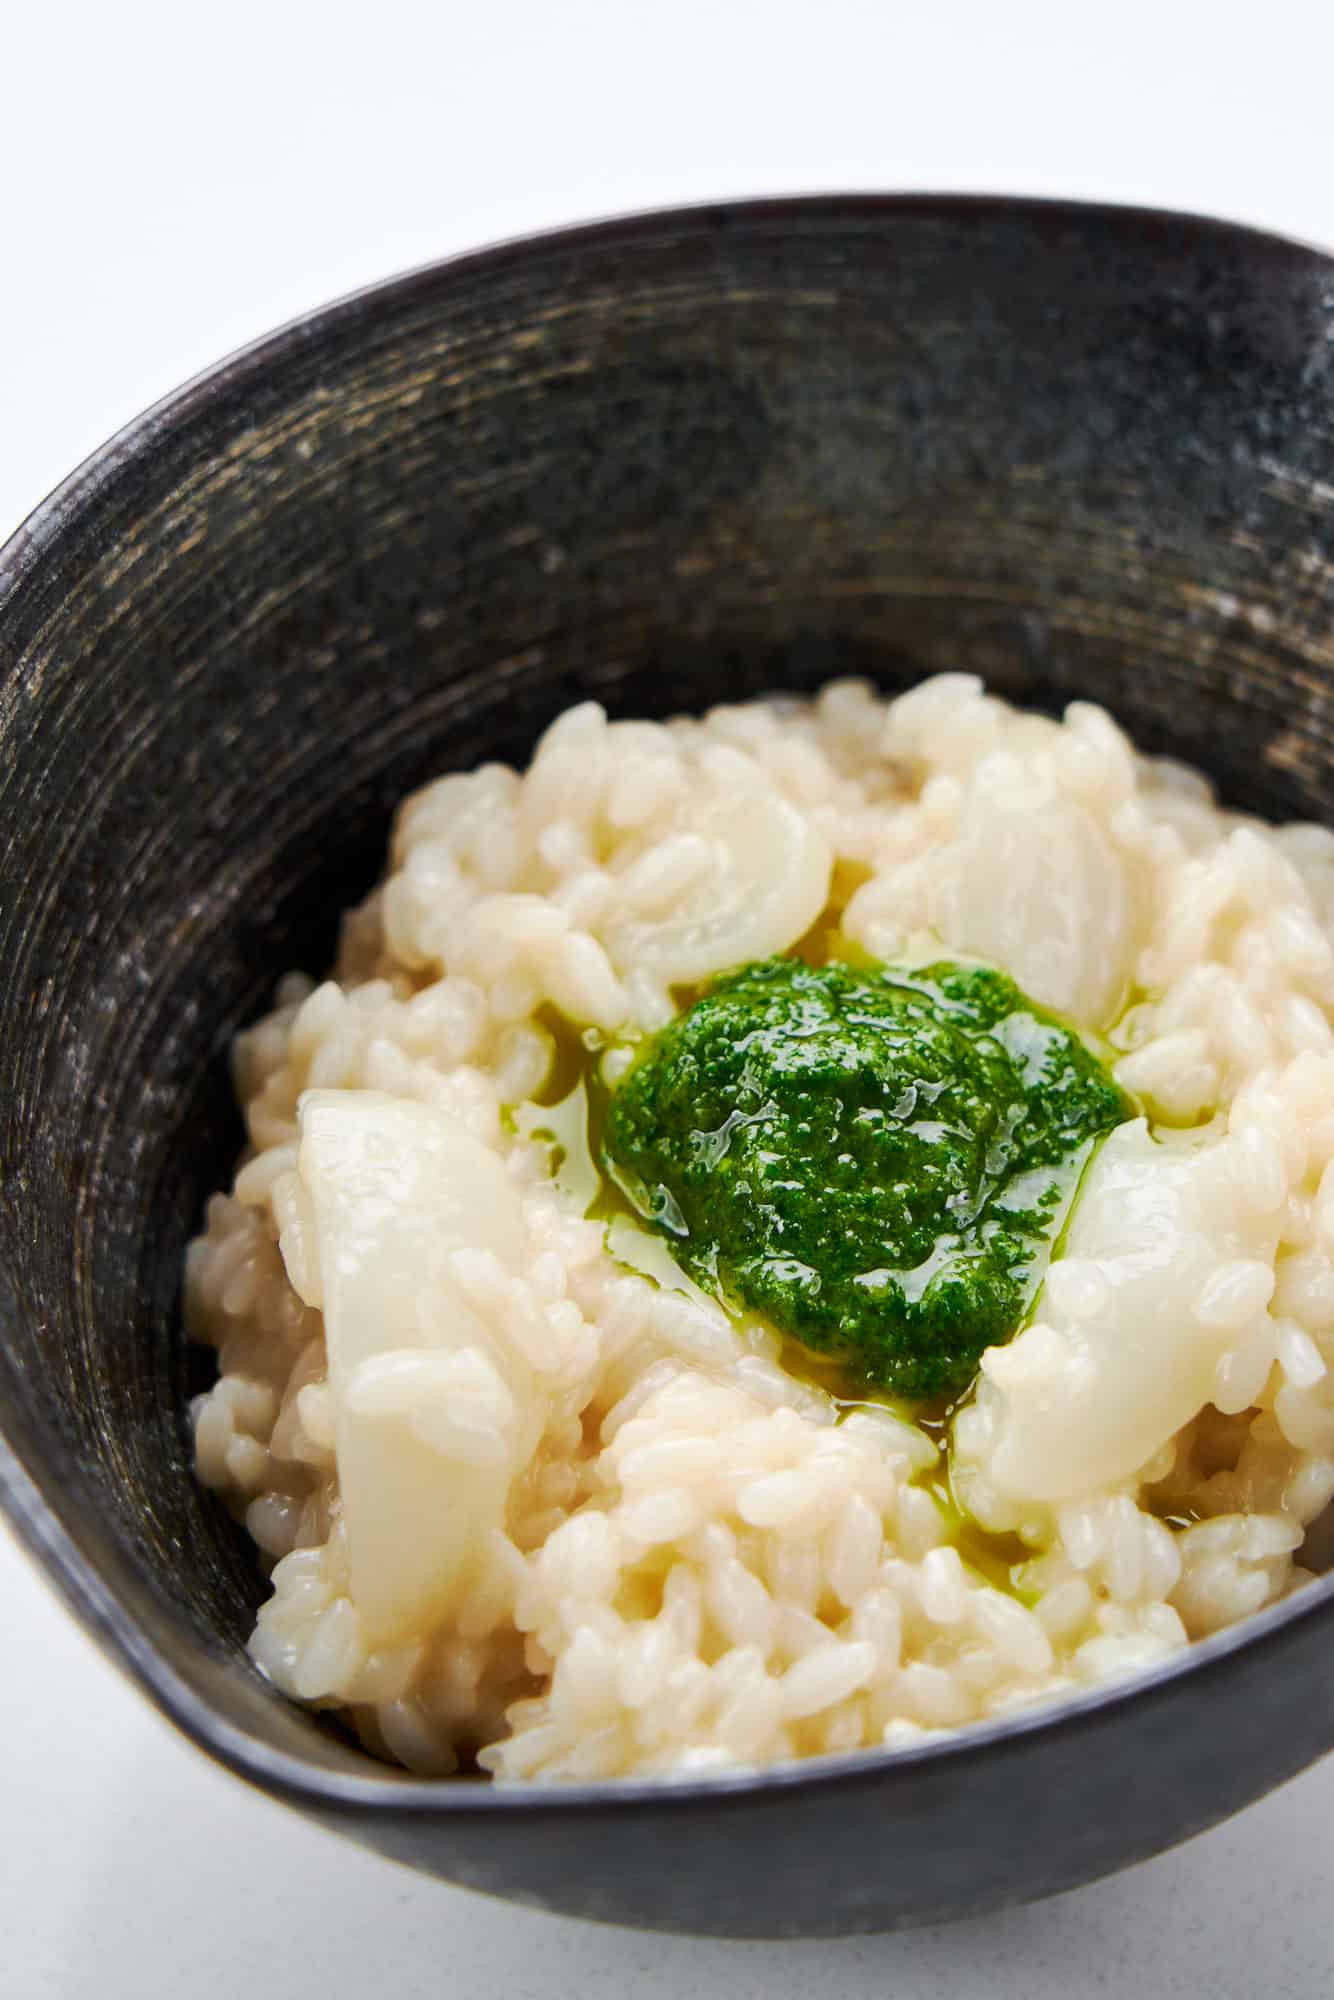 This 7 herbs porridge is traditionally eaten in Japan on January 7th.